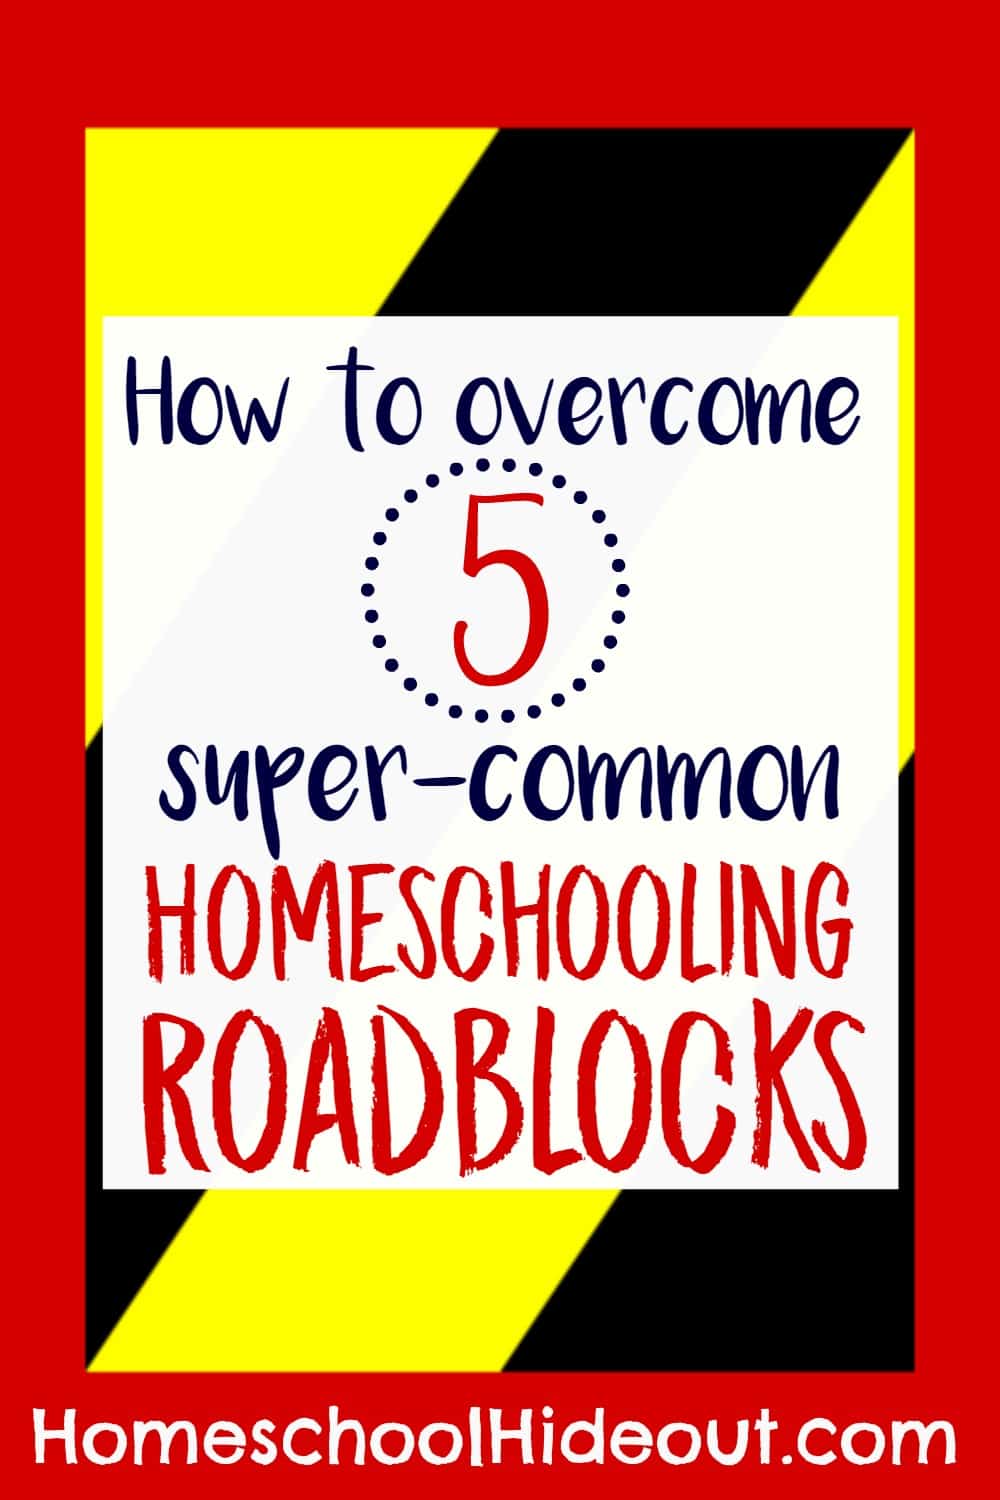 Overcome your homeschooling roadblocks with these 5 tips!